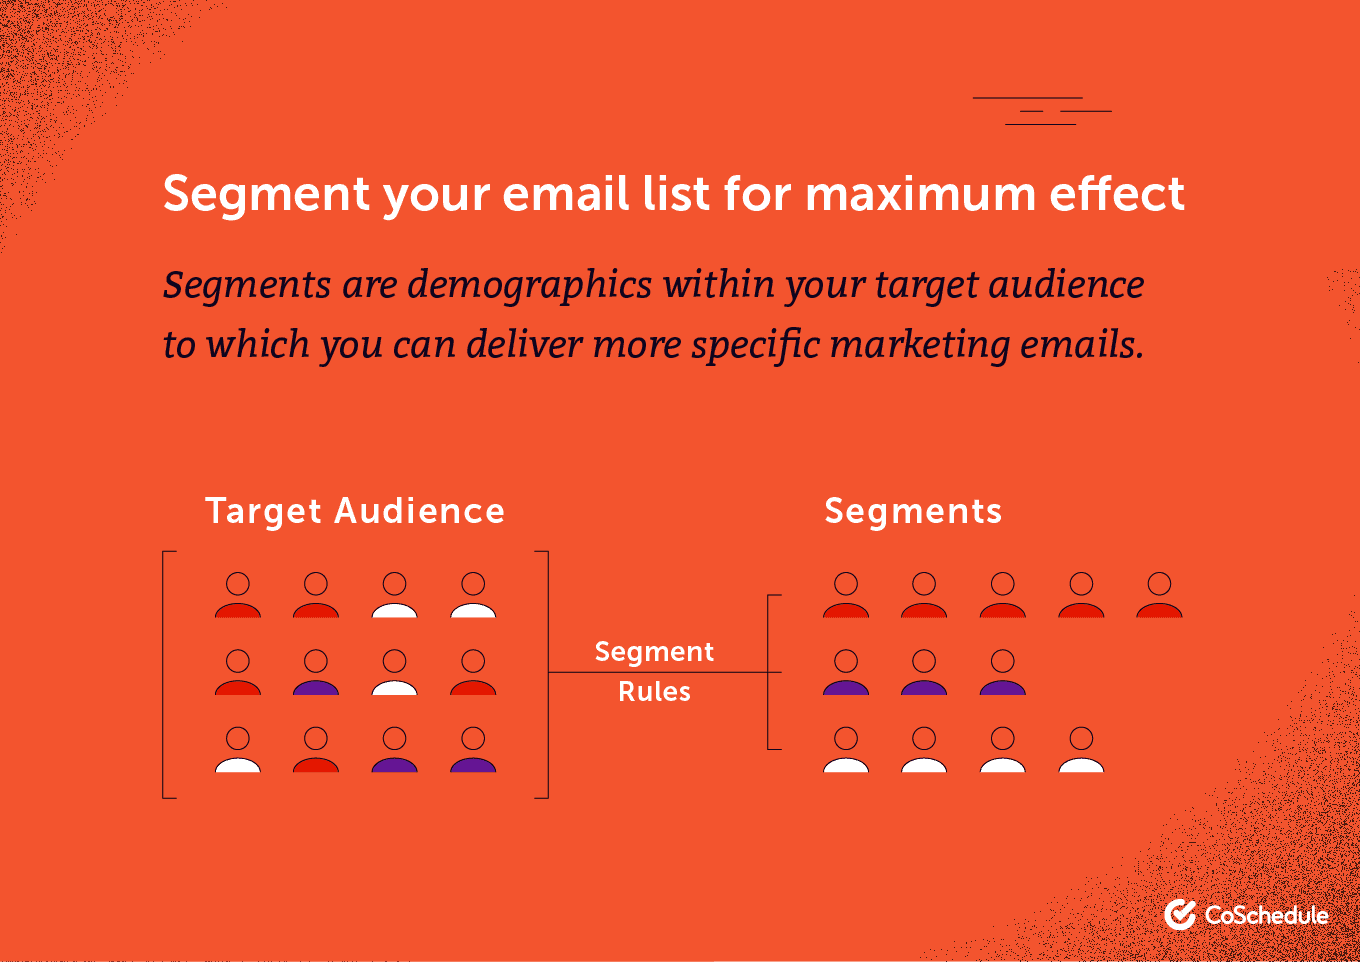 Segment your email list for maximum effect